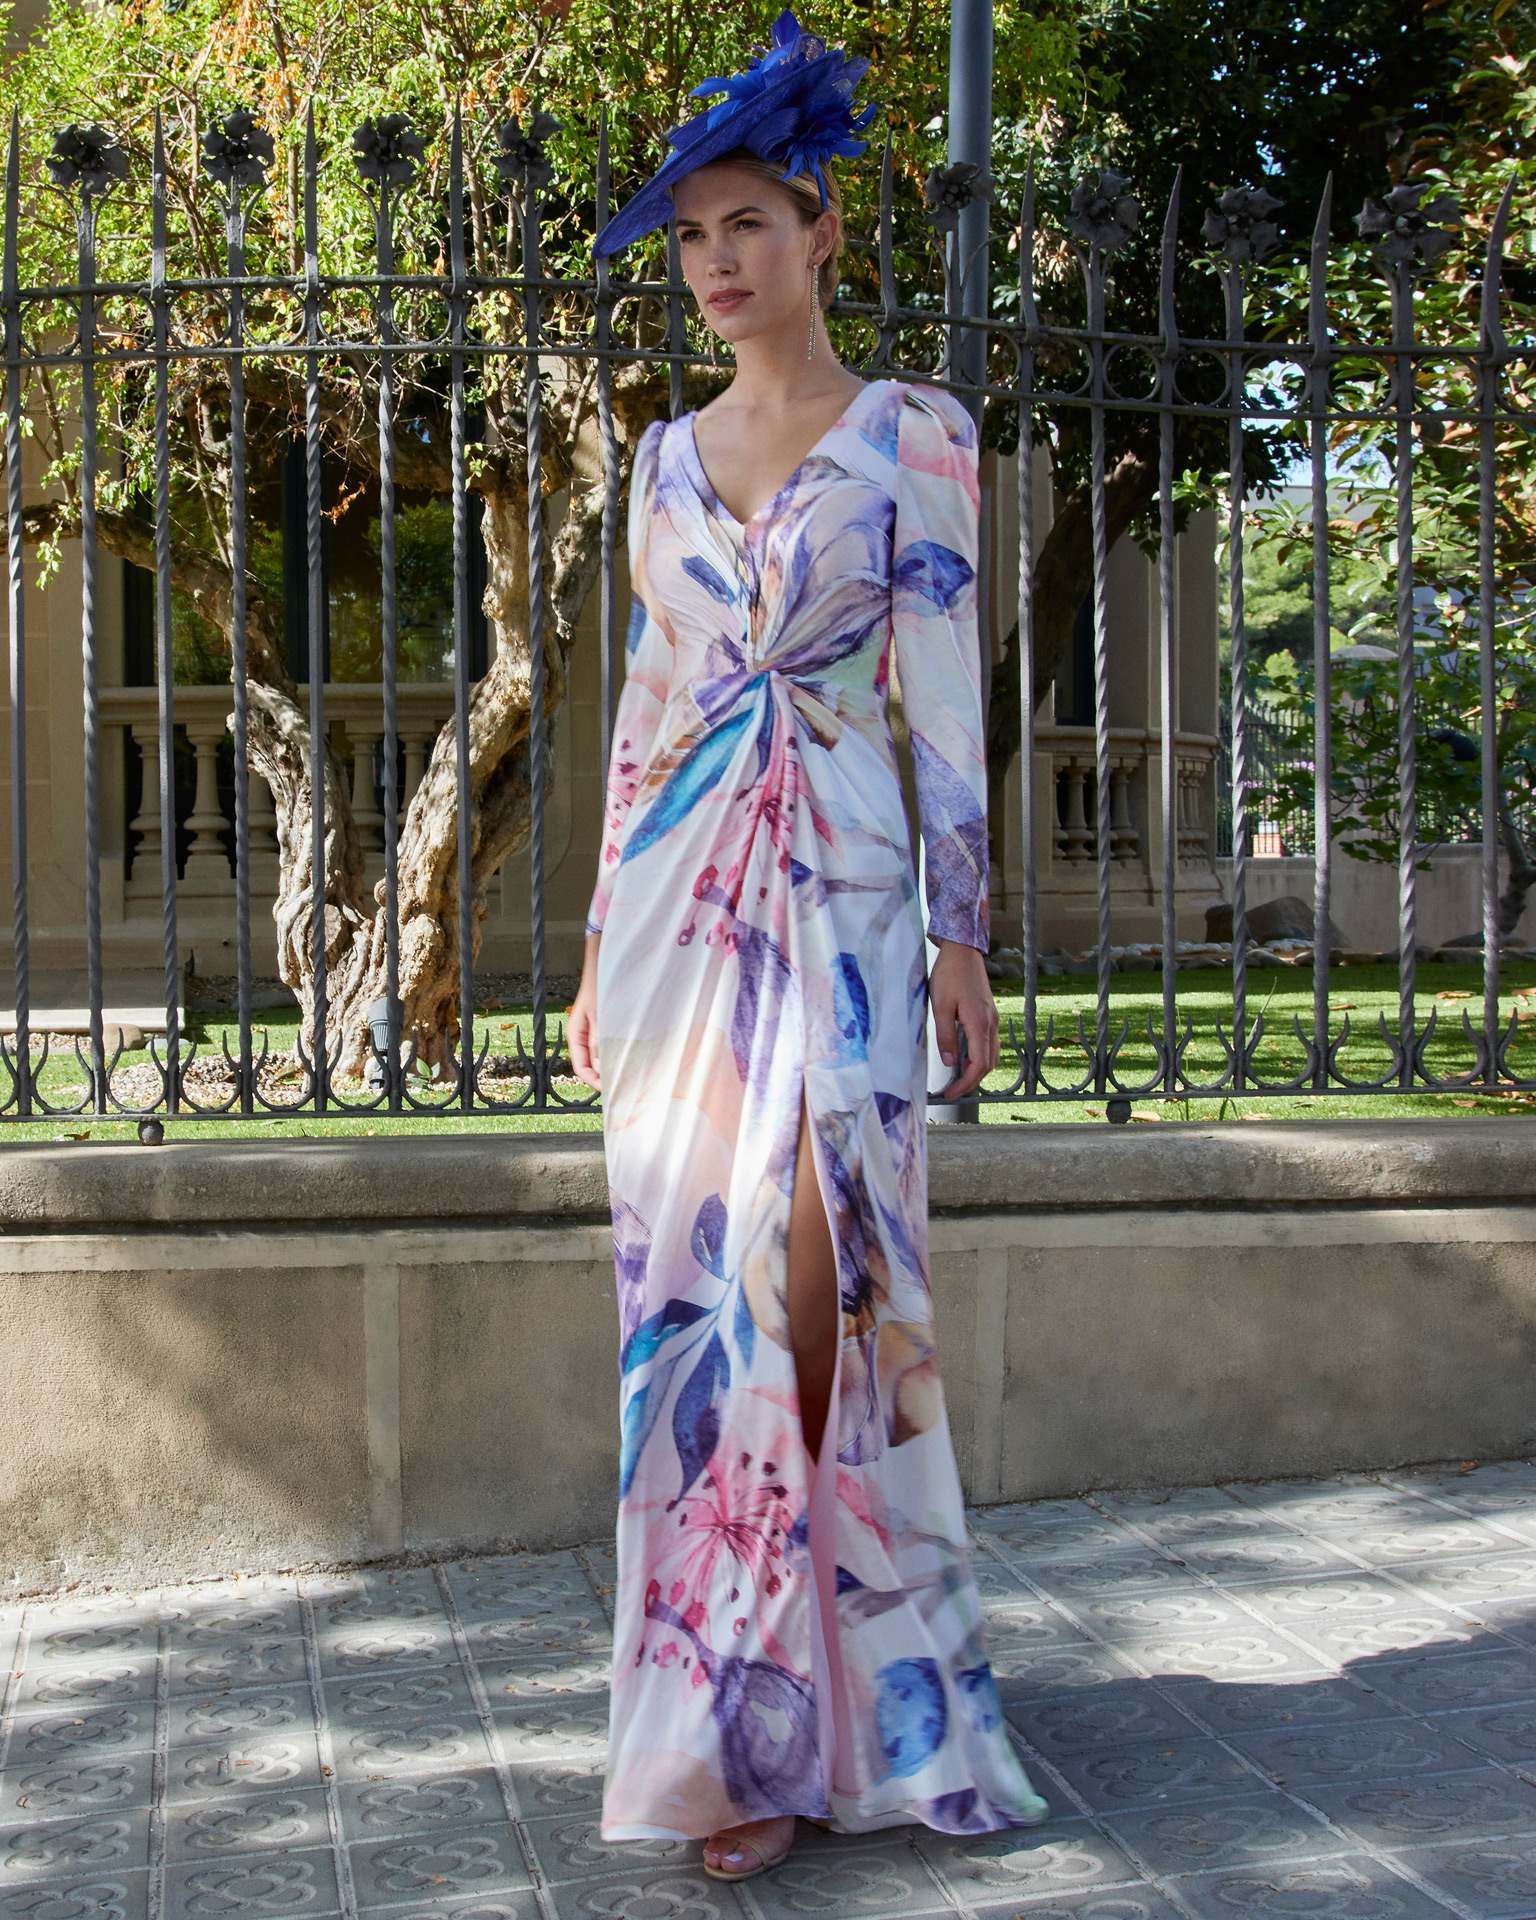 Long and elegant guest dress. Made with printed satin. With v-neckline, teardrop back, long sleeves and skirt with side slit. Couture Club look for parties and celebrations. MARFIL_BARCELONA.